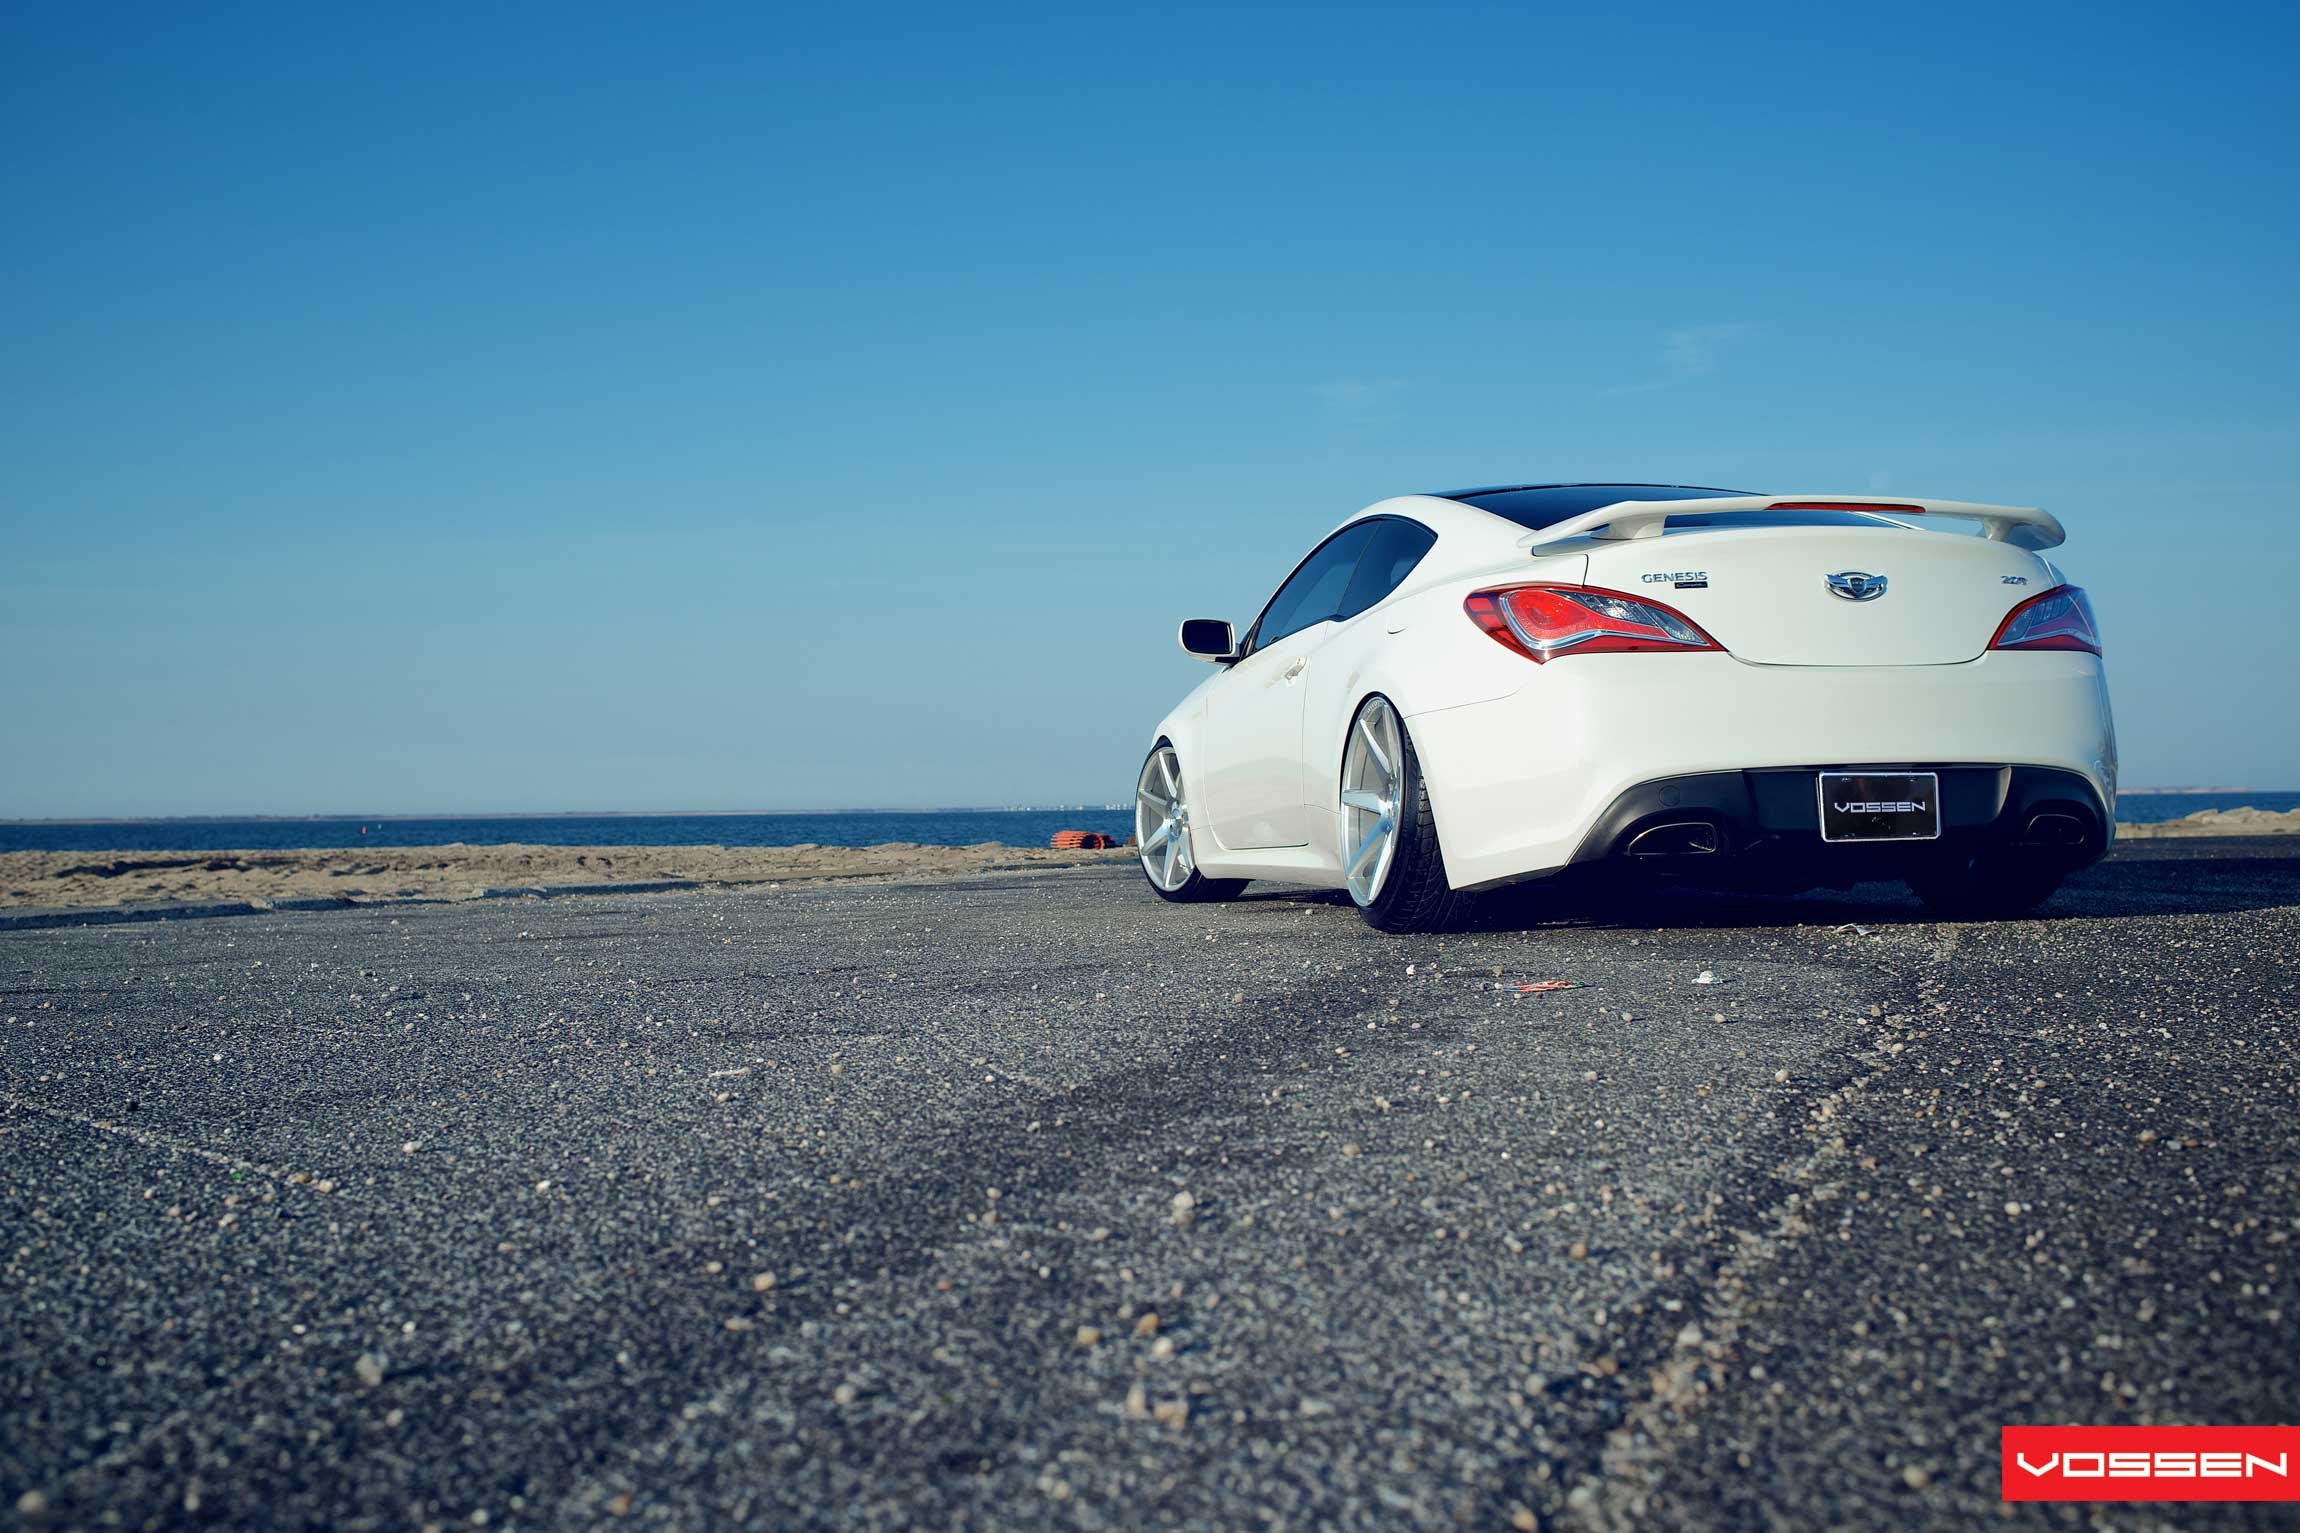 Aftermarket Rear Spoiler on Hyundai Genesis Coupe - Photo by Vossen